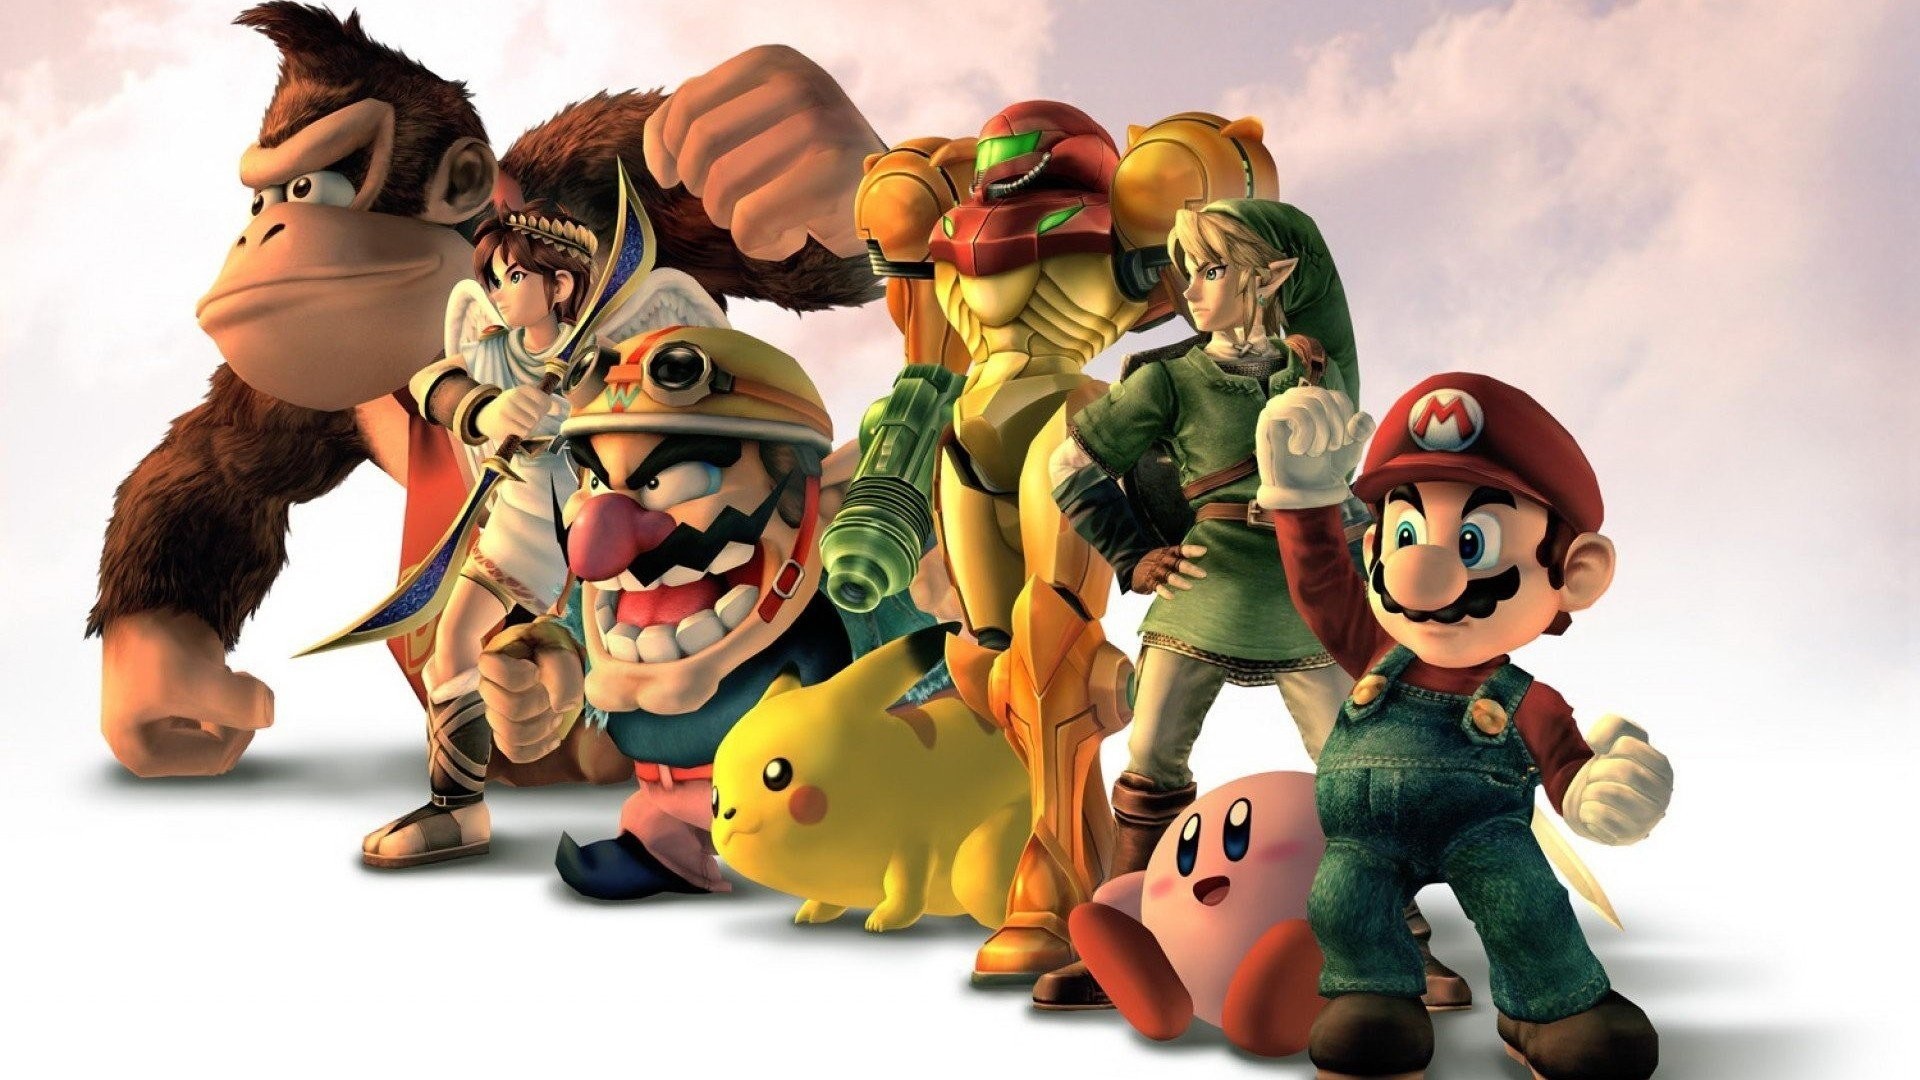 1920x1080 Super smash bros 4 images auditions hd wallpaper and background - Lego  Movie Producer Would Love